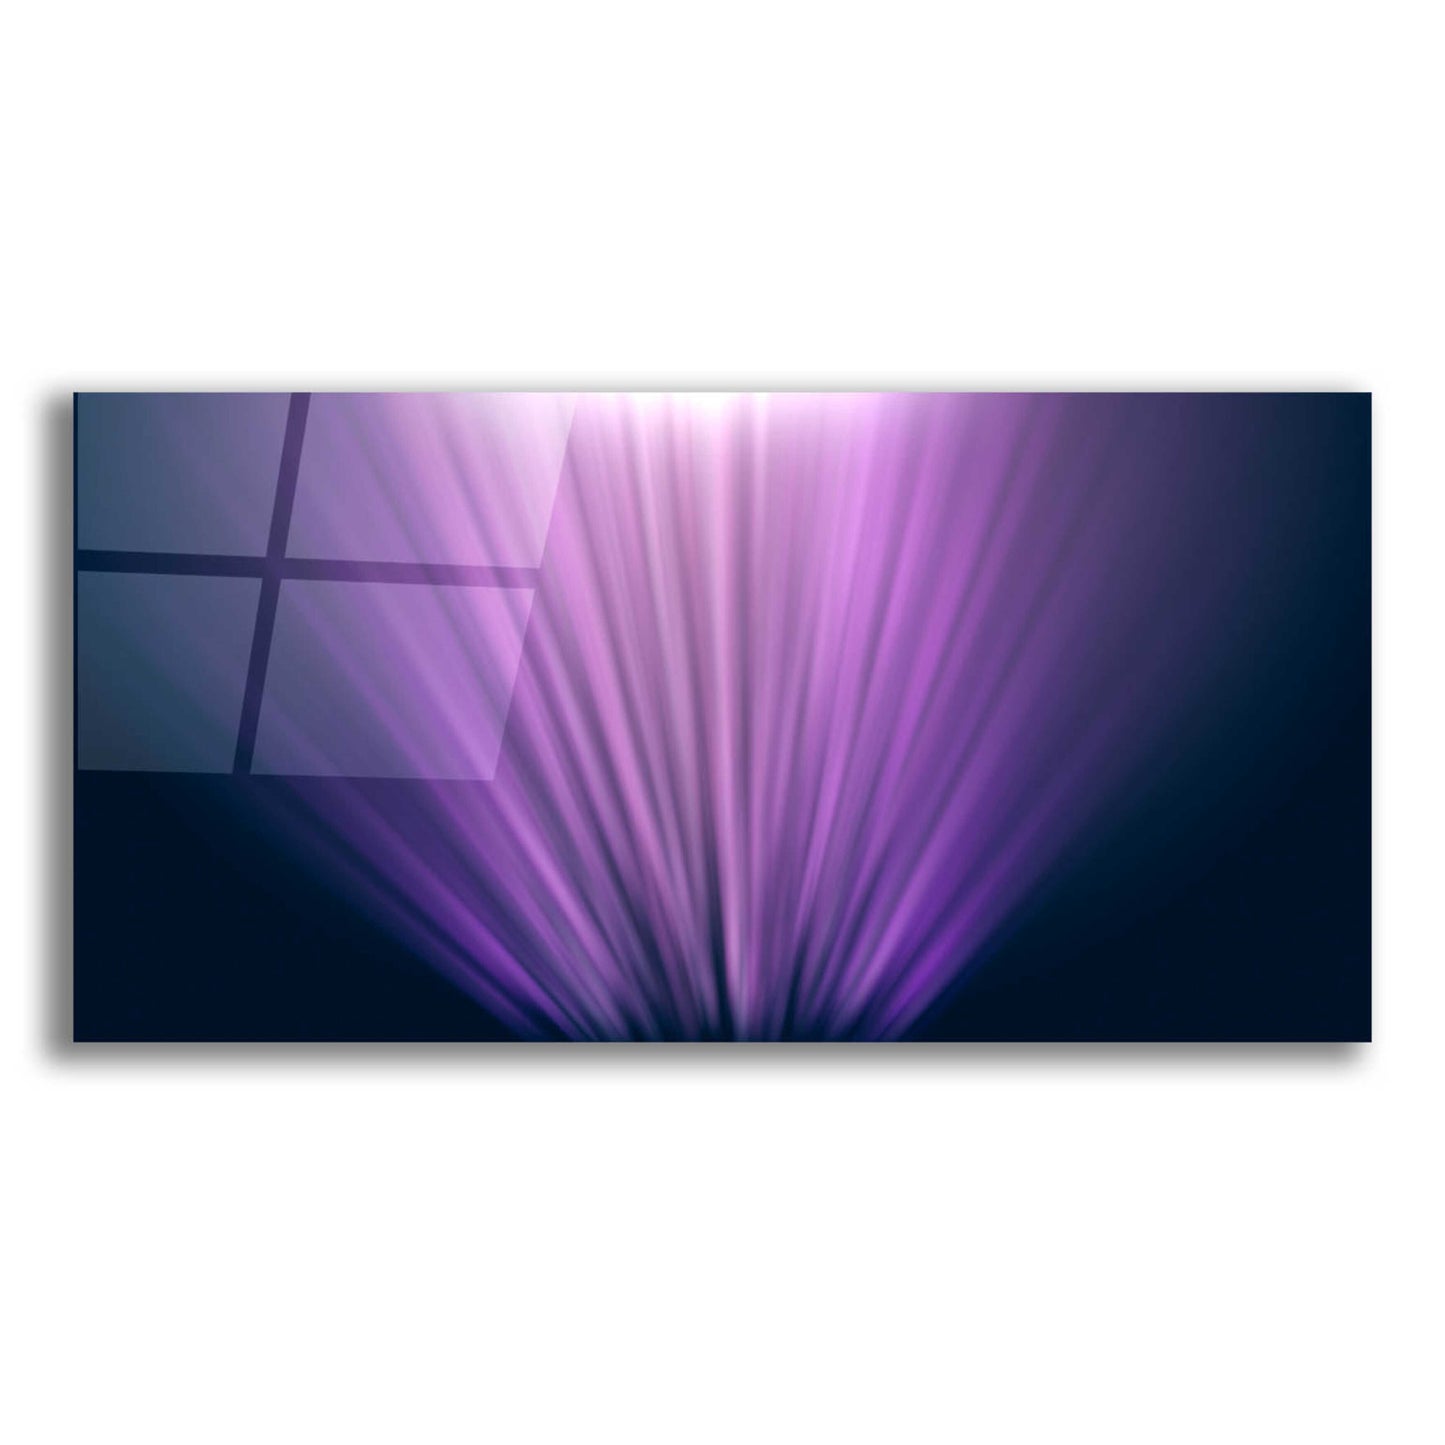 Epic Art 'Peraly Rays' by Unknown Artist, Acrylic Glass Wall Art,24x12